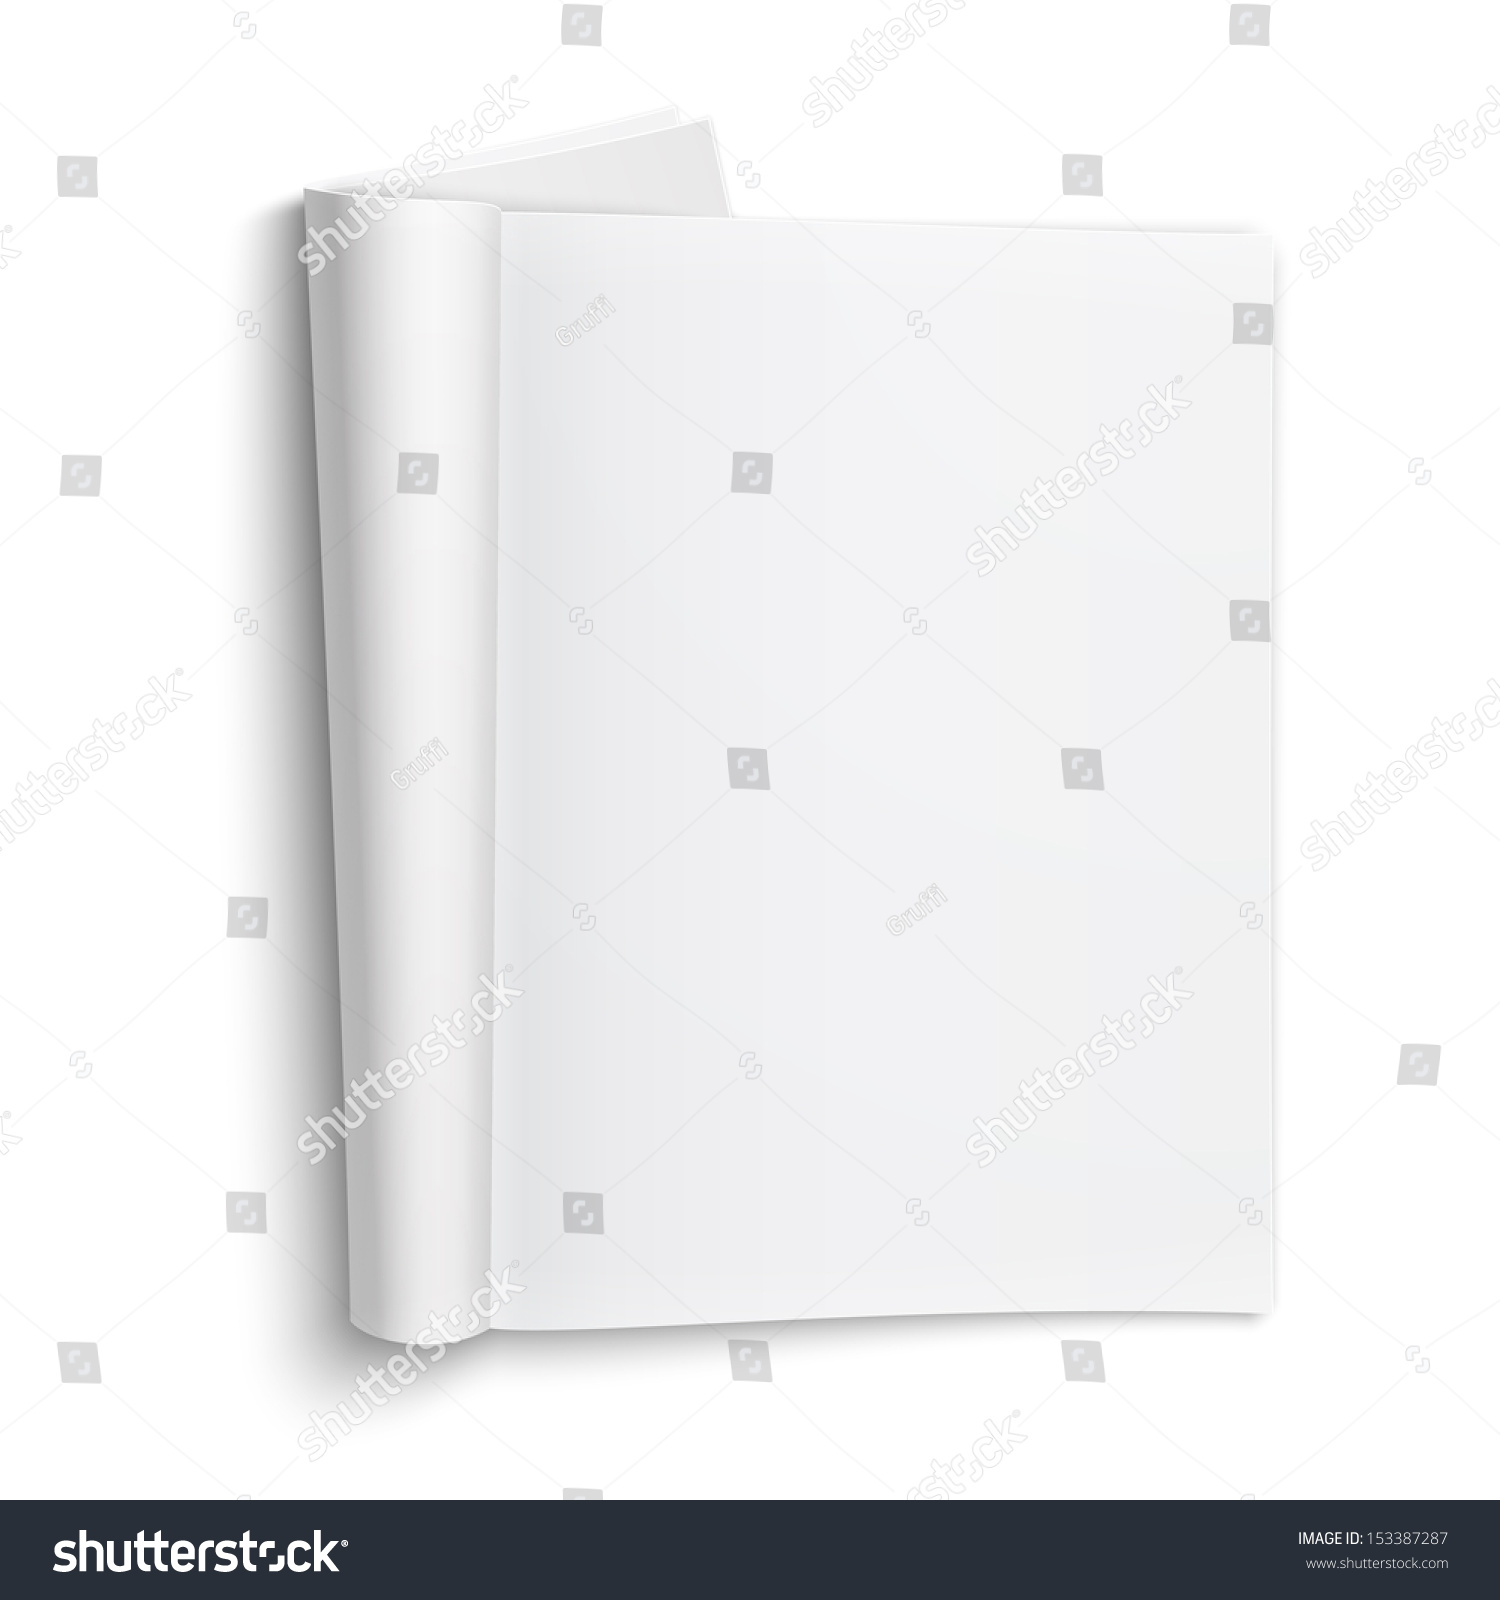 Blank open magazine template on white background with soft shadows. Vector illustration. EPS10. #153387287